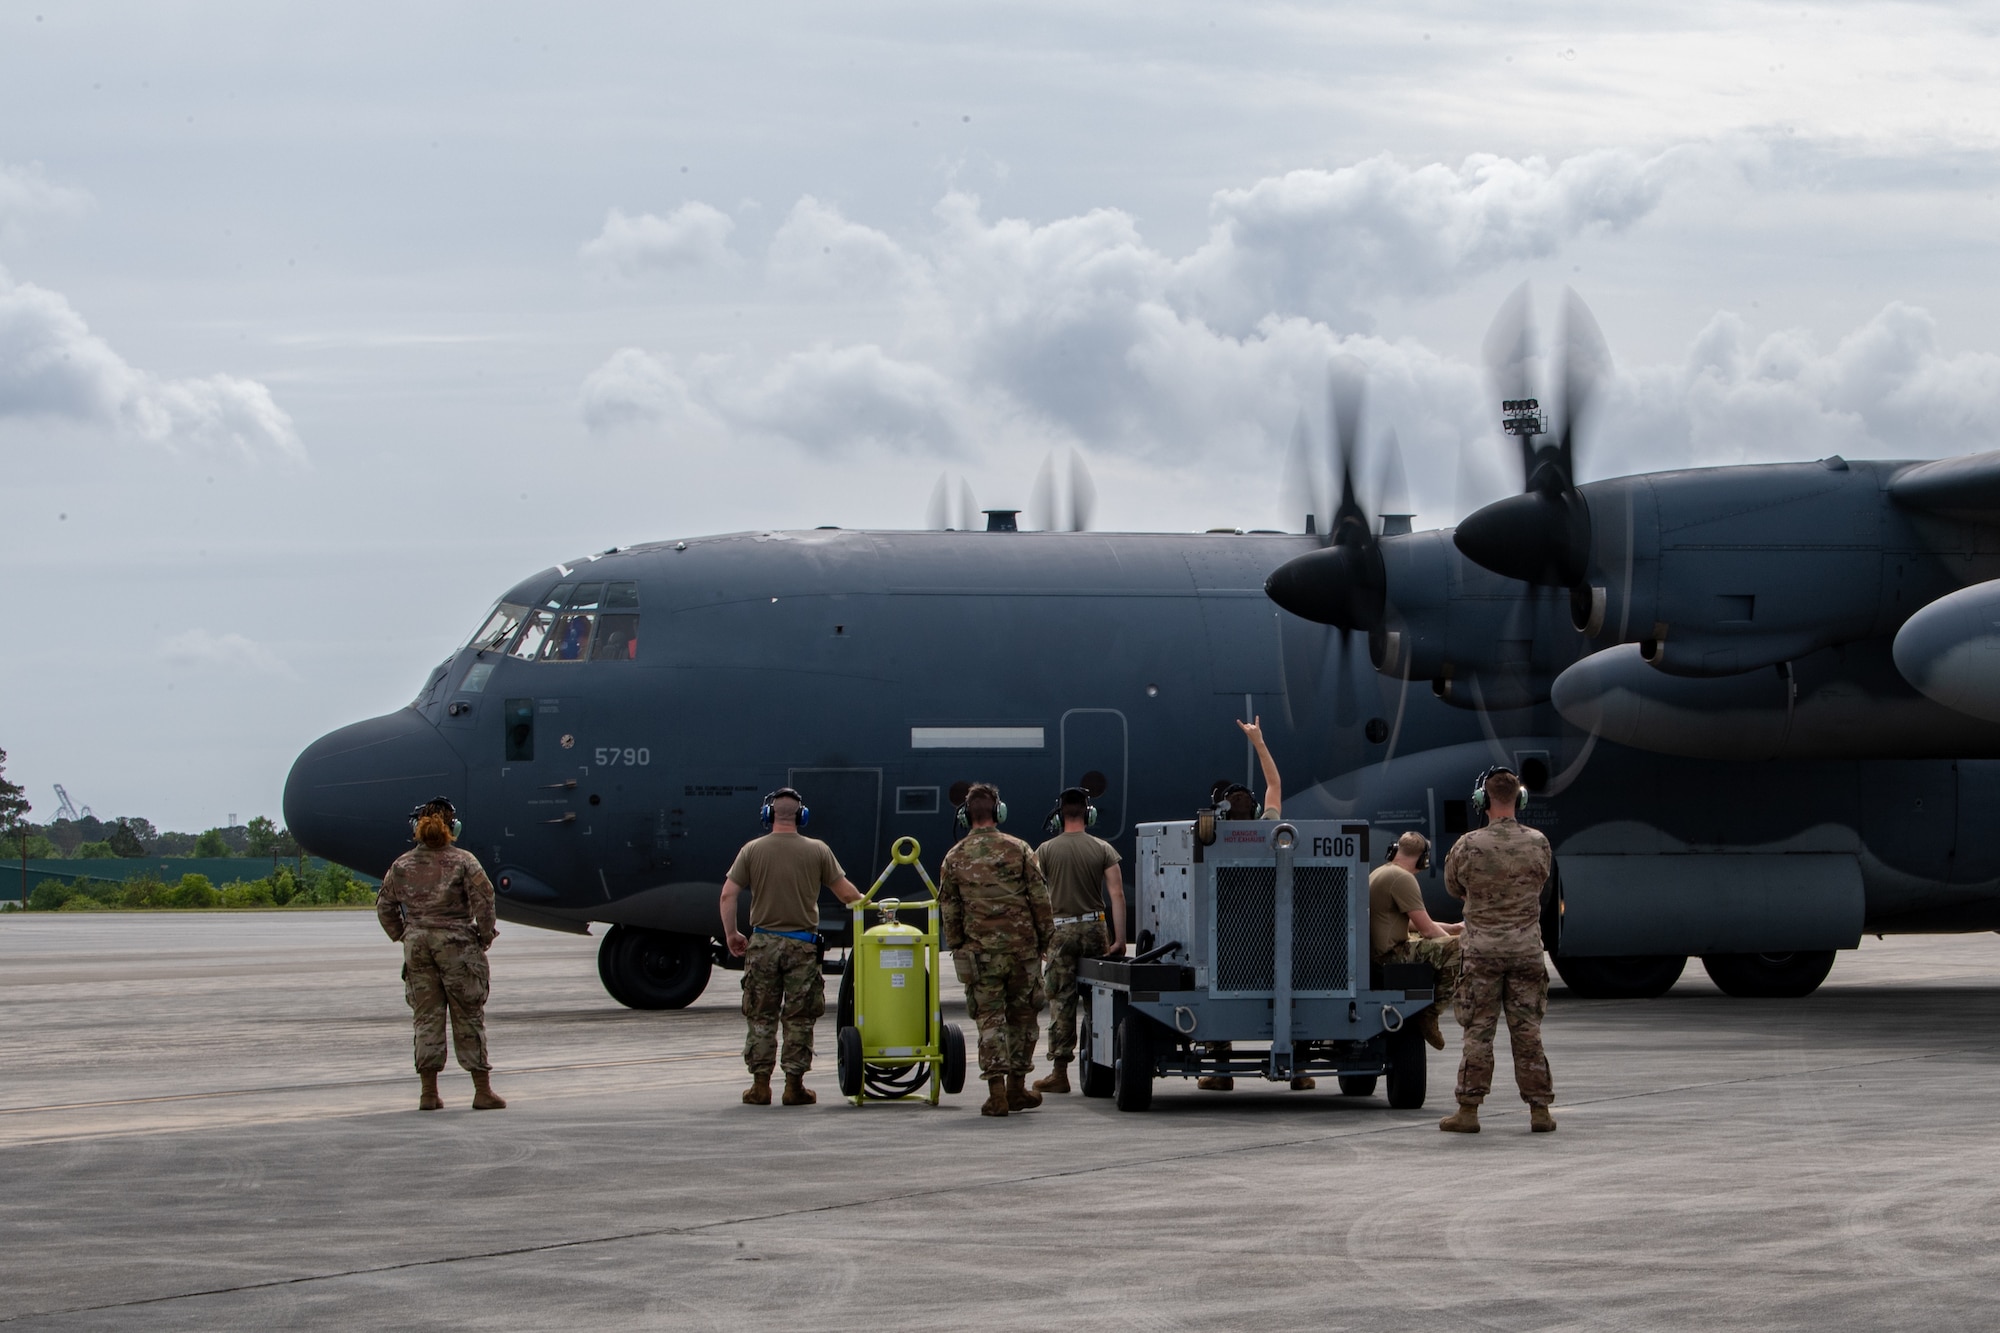 U.S. Air Force Airmen assigned to the 23rd Wing watch as an HC-130J Combat King II starts engines during Exercise Ready Tiger 24-1 at Savannah Air National Guard Base in Savannah, Georgia, April 10, 2024. Built upon Air Combat Command's directive to assert air power in contested environments, Exercise Ready Tiger 24-1 aims to test and enhance the 23rd Wing’s proficiency in executing Lead Wing and Expeditionary Air Base concepts through Agile Combat Employment and command and control operations. (U.S. Air Force photo by Senior Airman Courtney Sebastianelli)